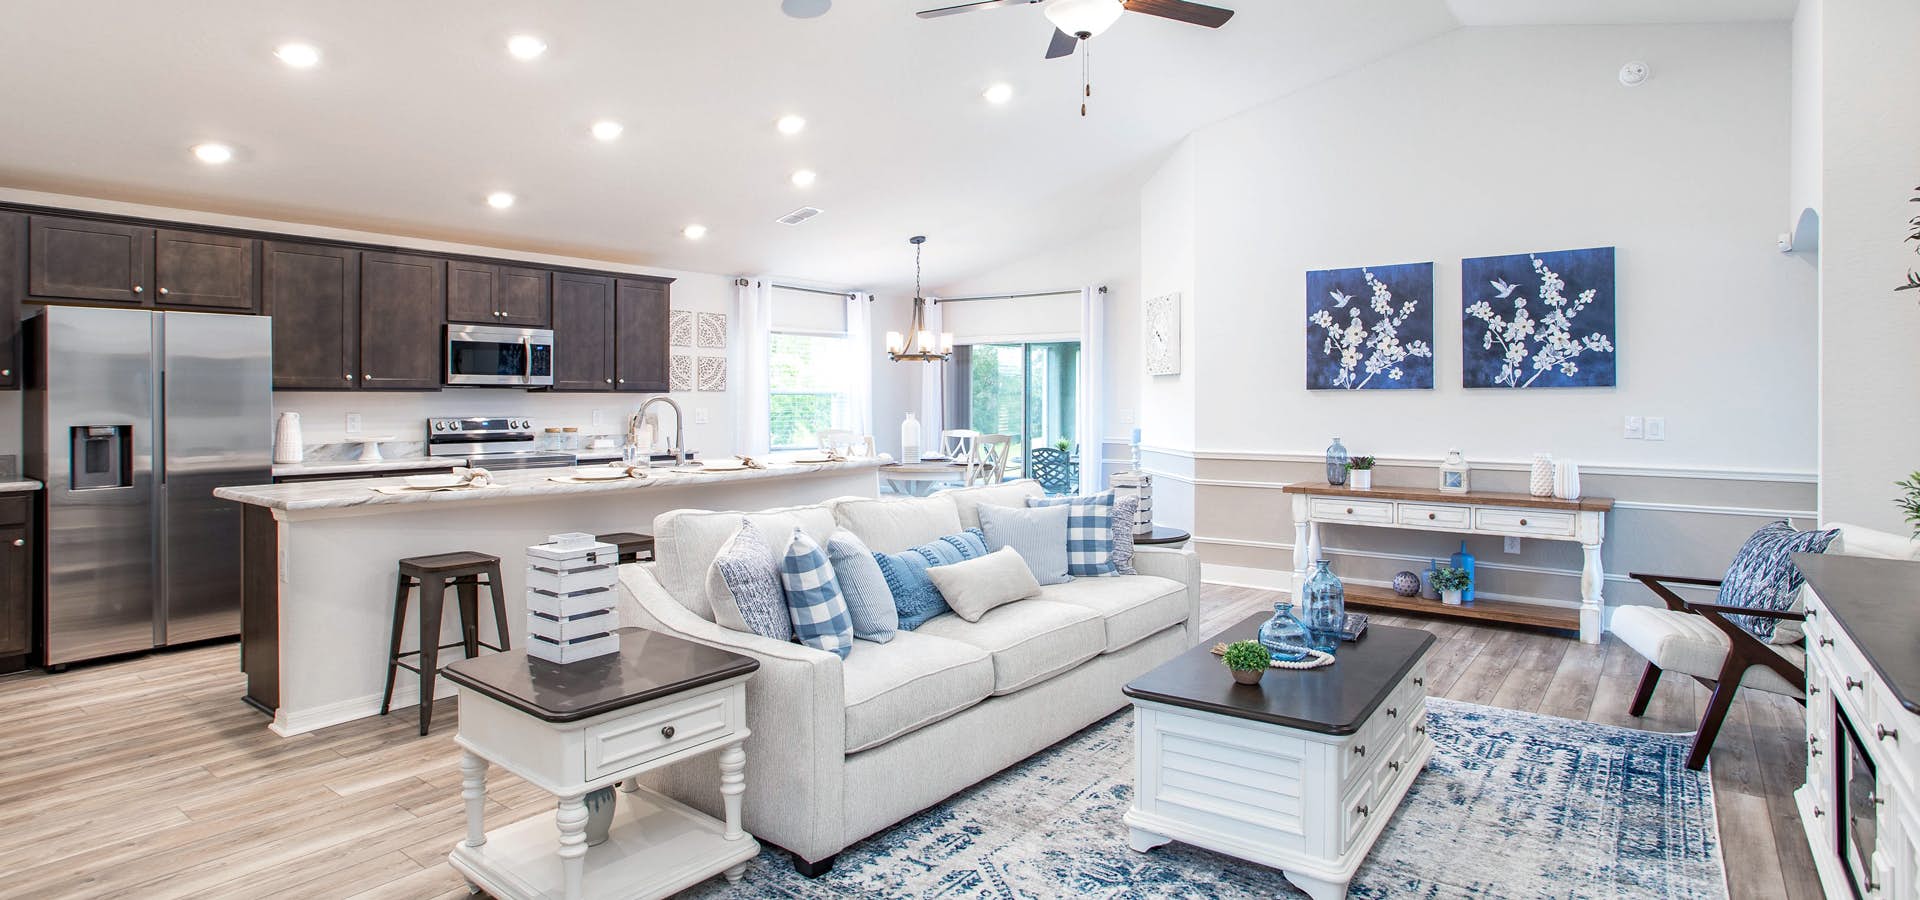 Open living area and kitchen with beachy decor